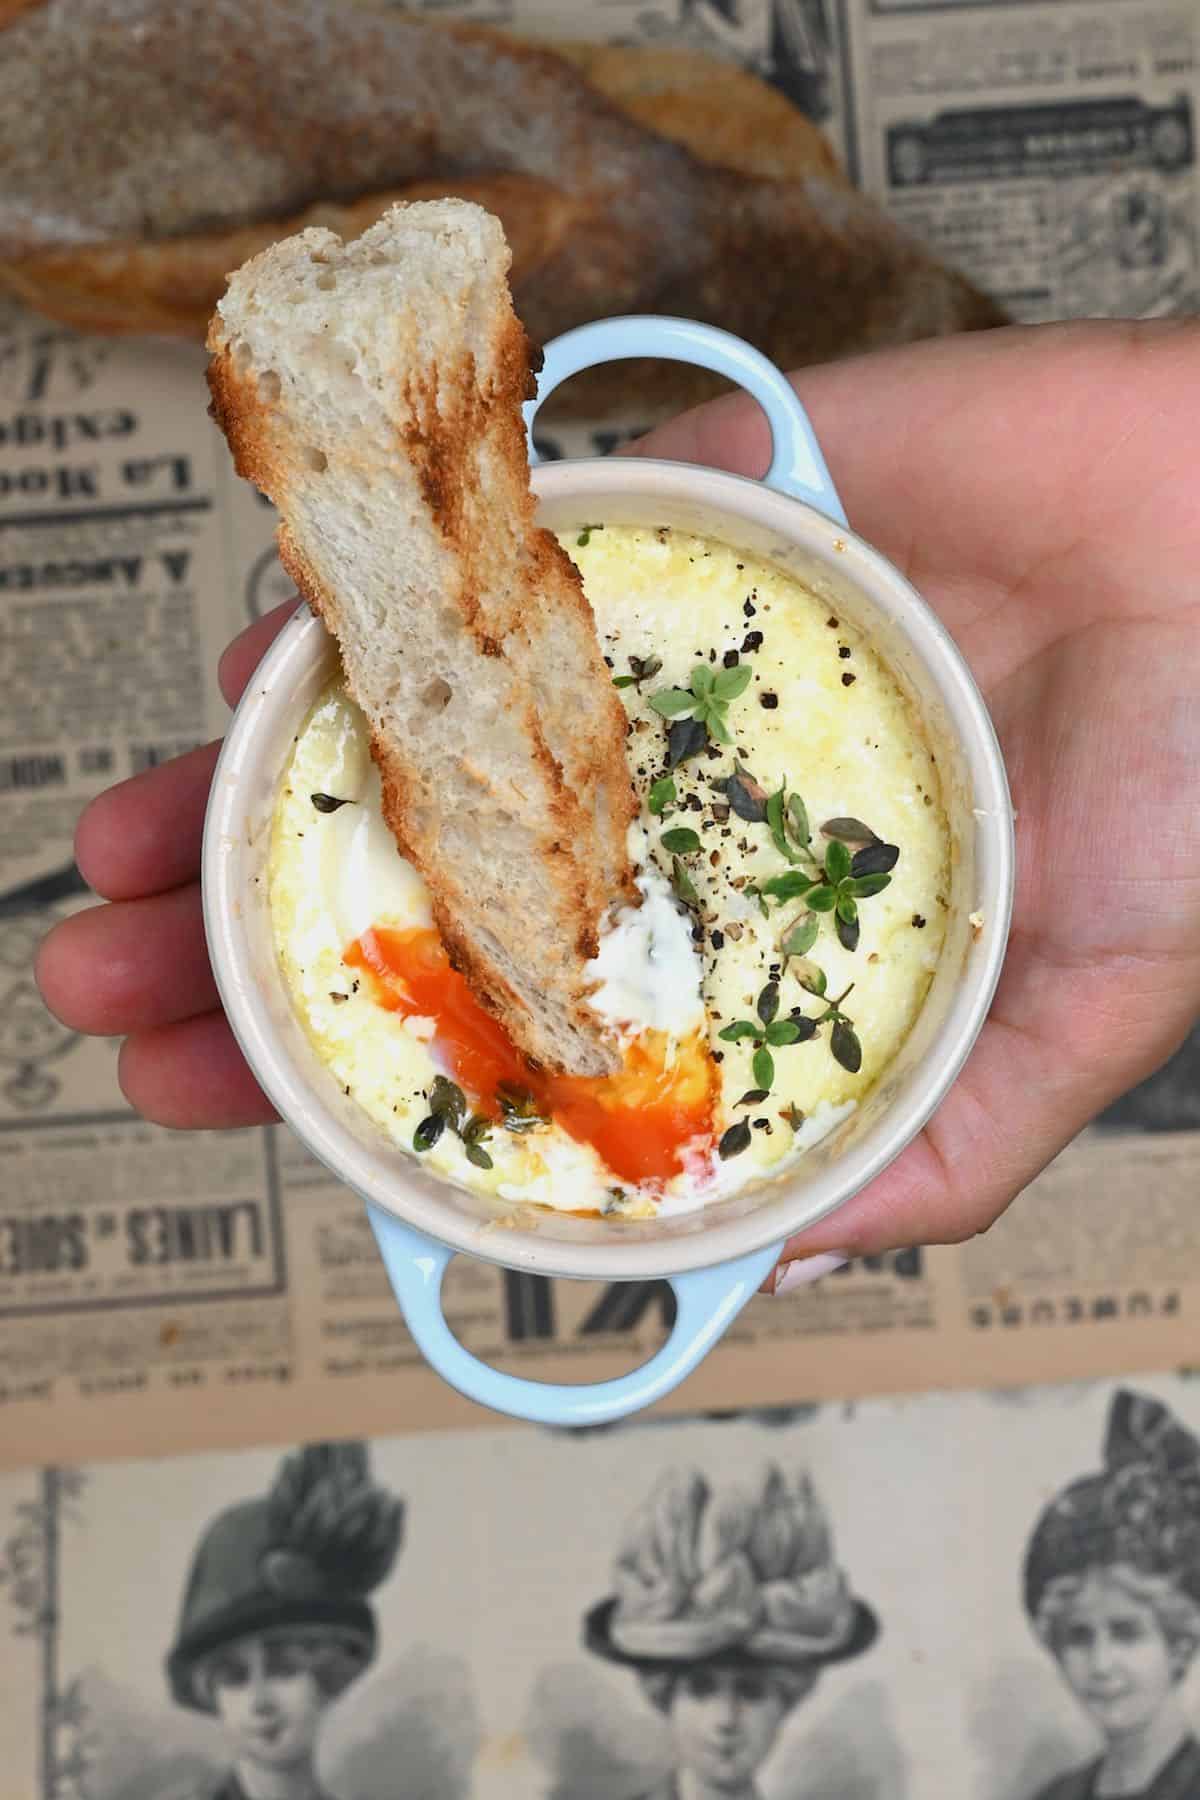 Baked eggs with bread being dipped in